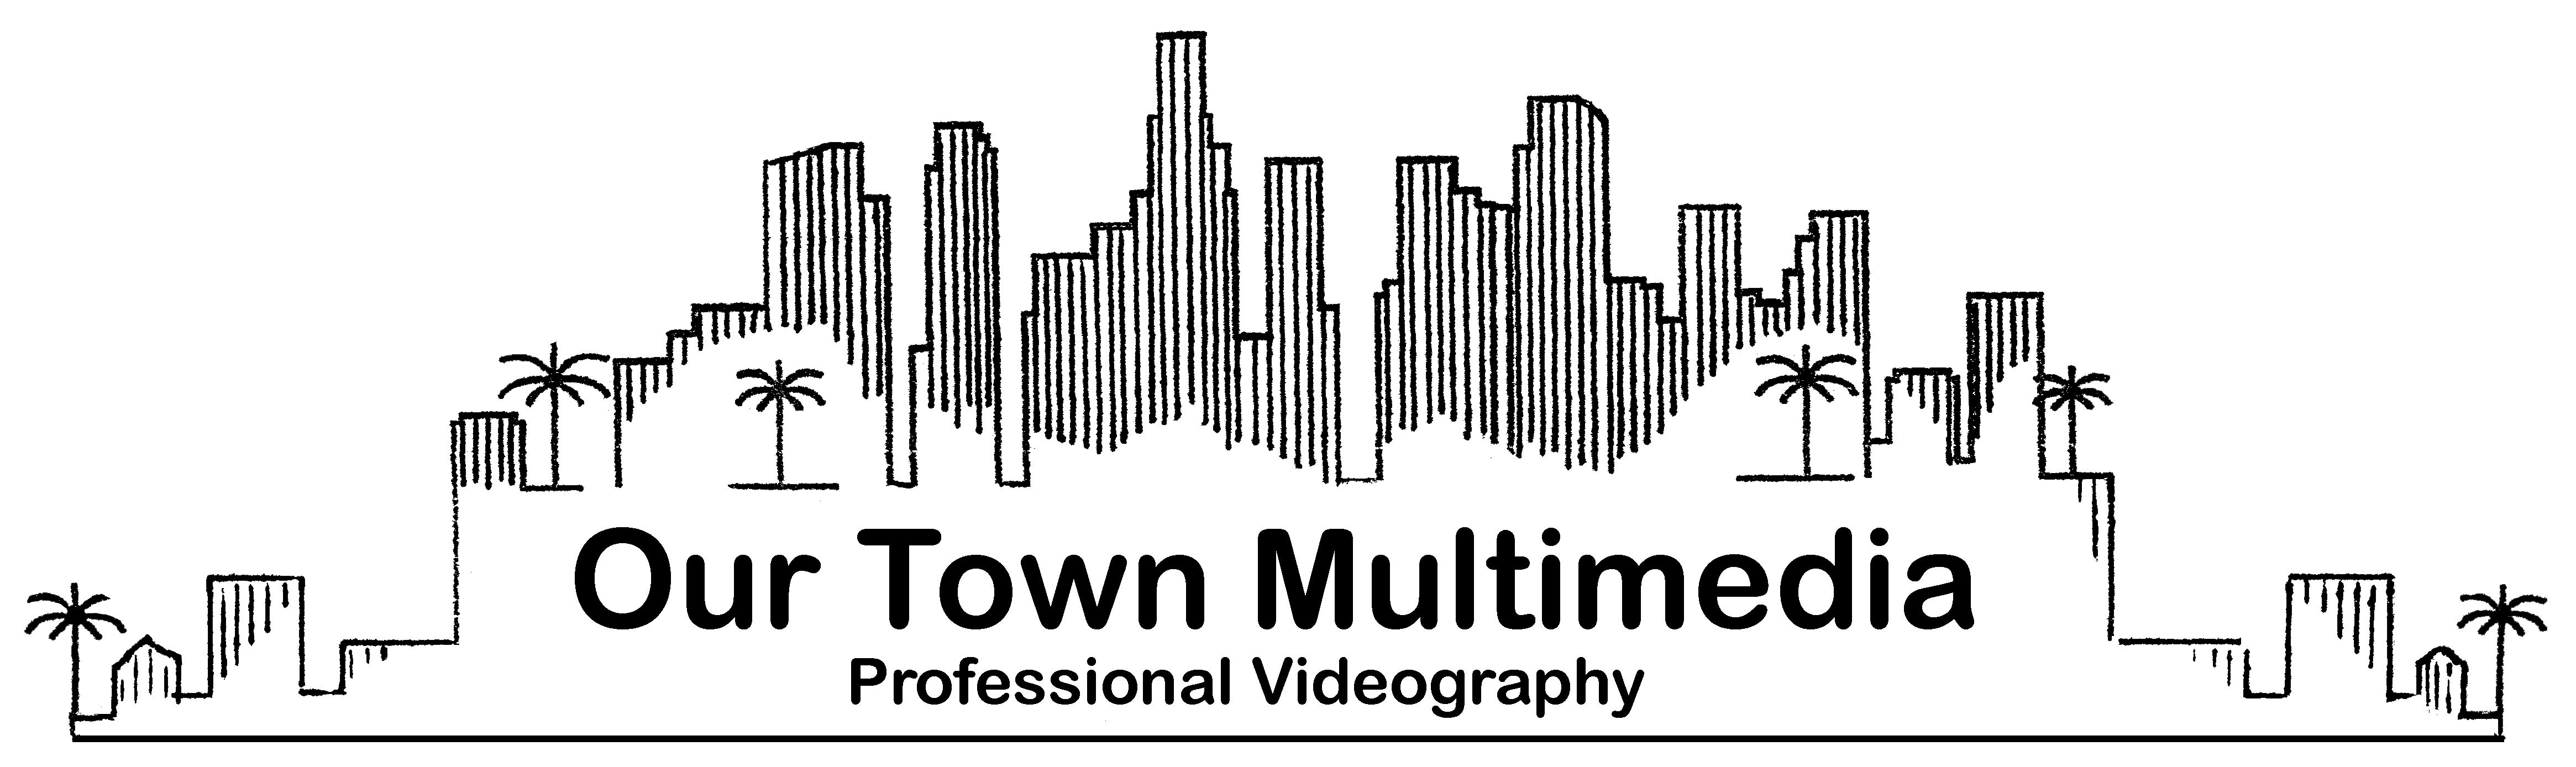 Our Town Multimedia Cityscape